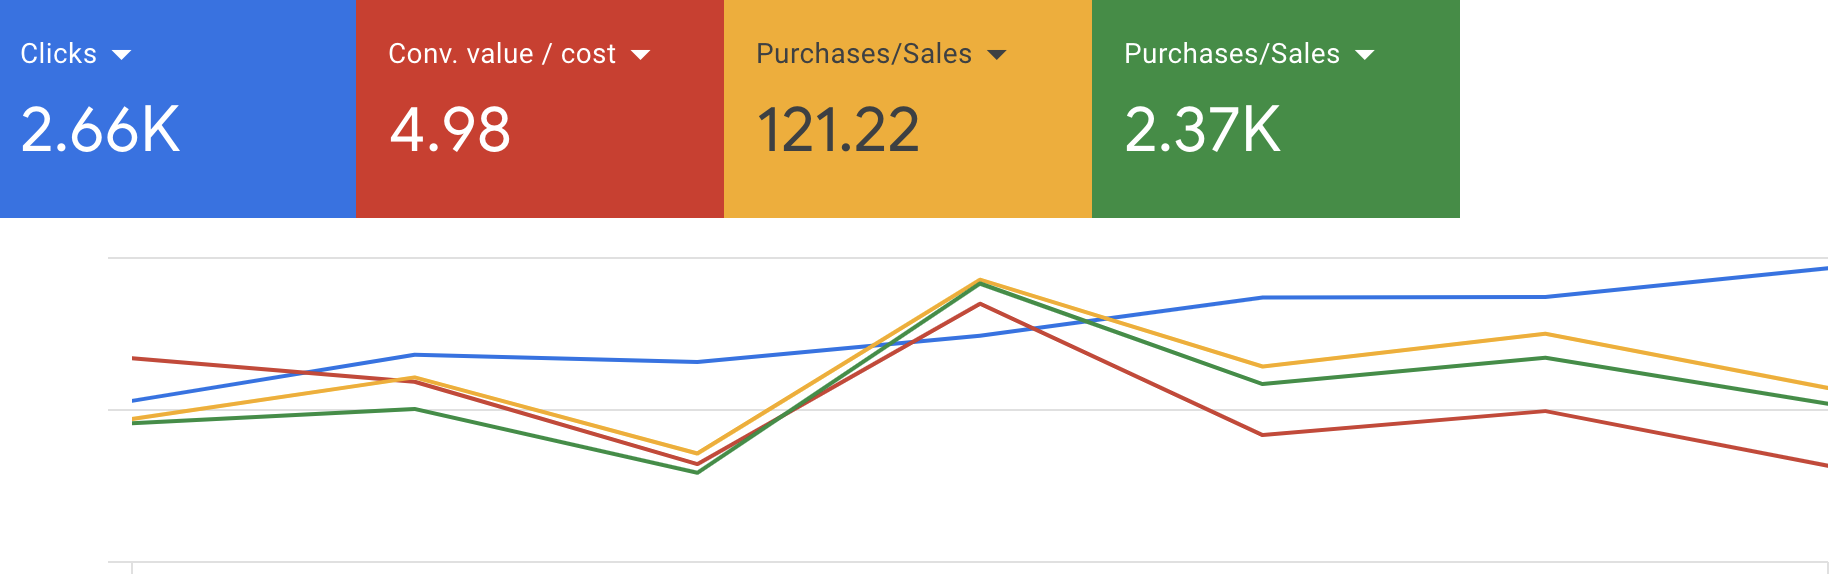 Screen shot of campaign metrics overview in Google Ads campaign